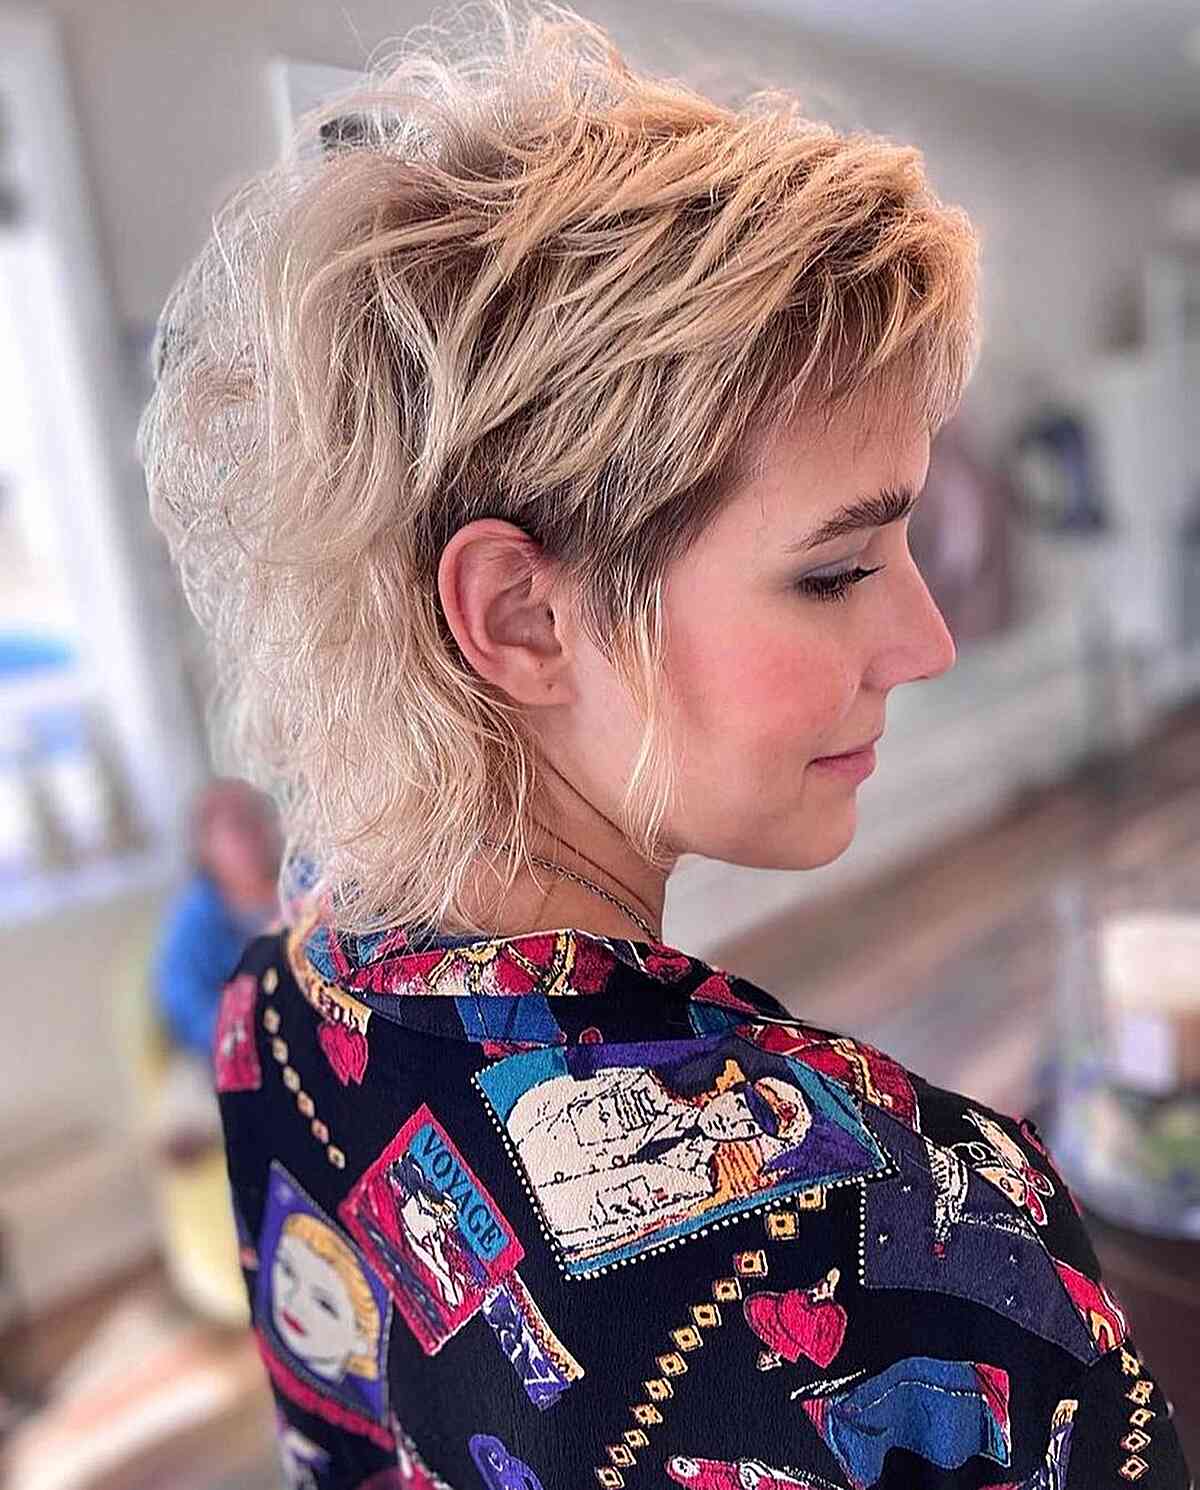 Blonde Shag Mullet for women with an edgy vibe